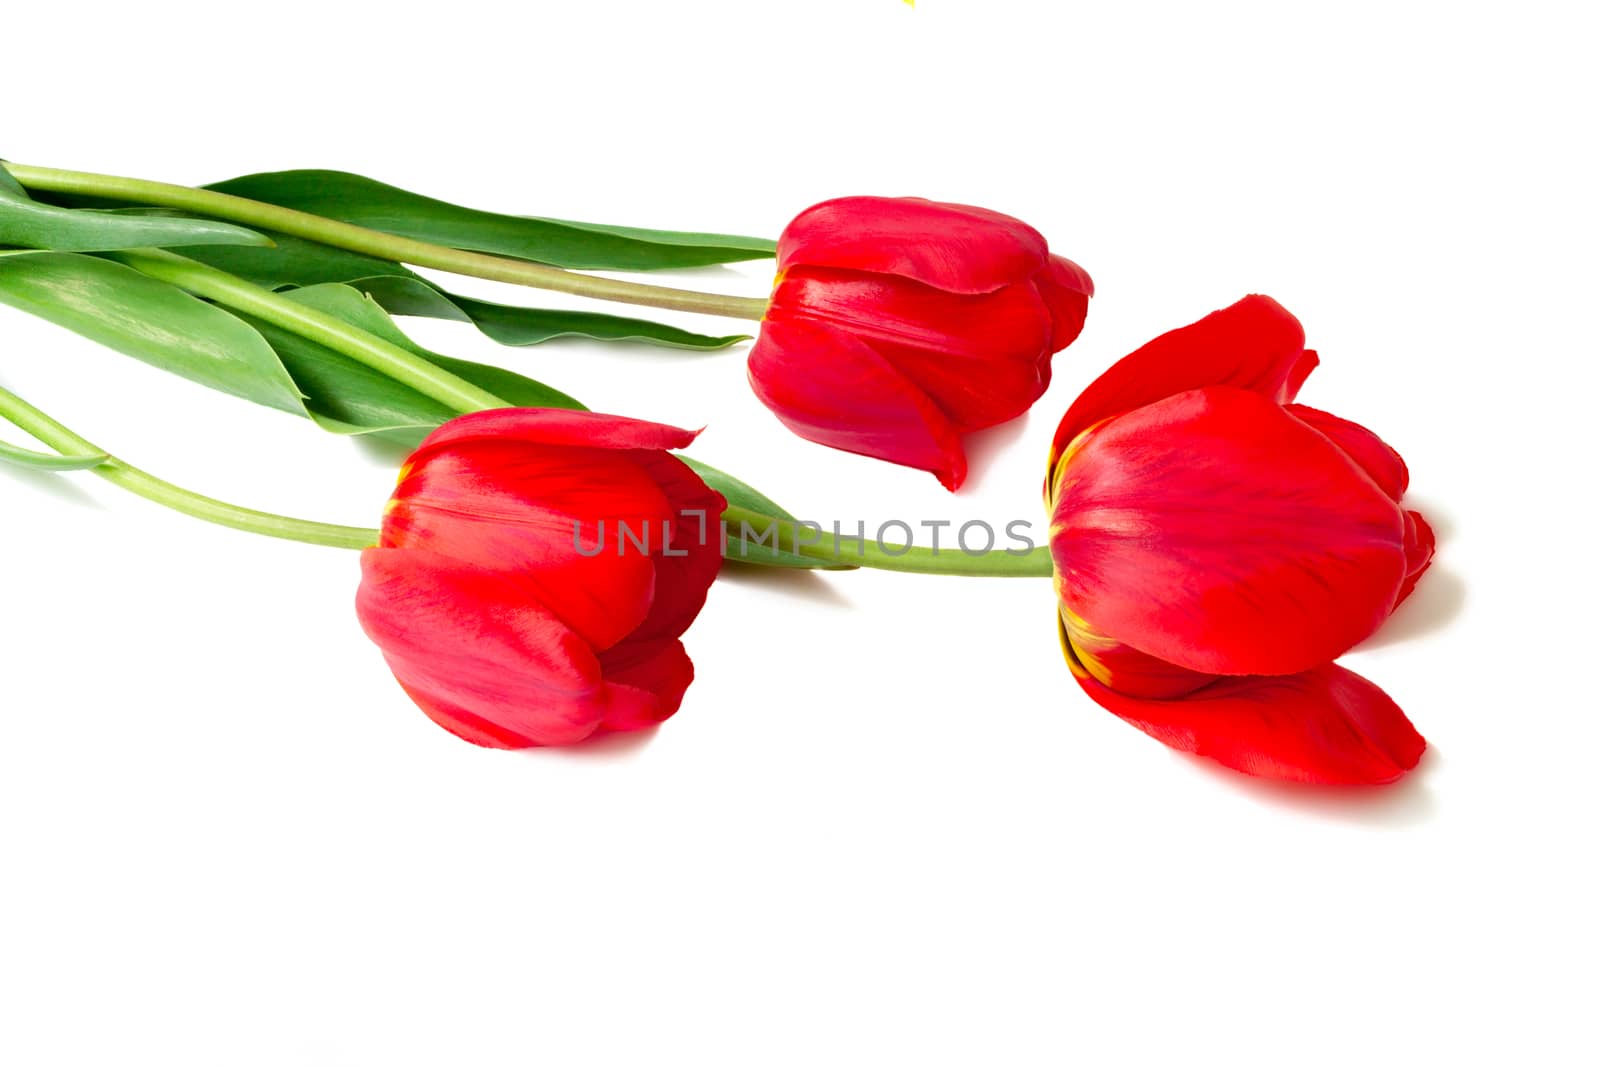 Three big beautiful tulips of bright red color with green leaves on a white background.